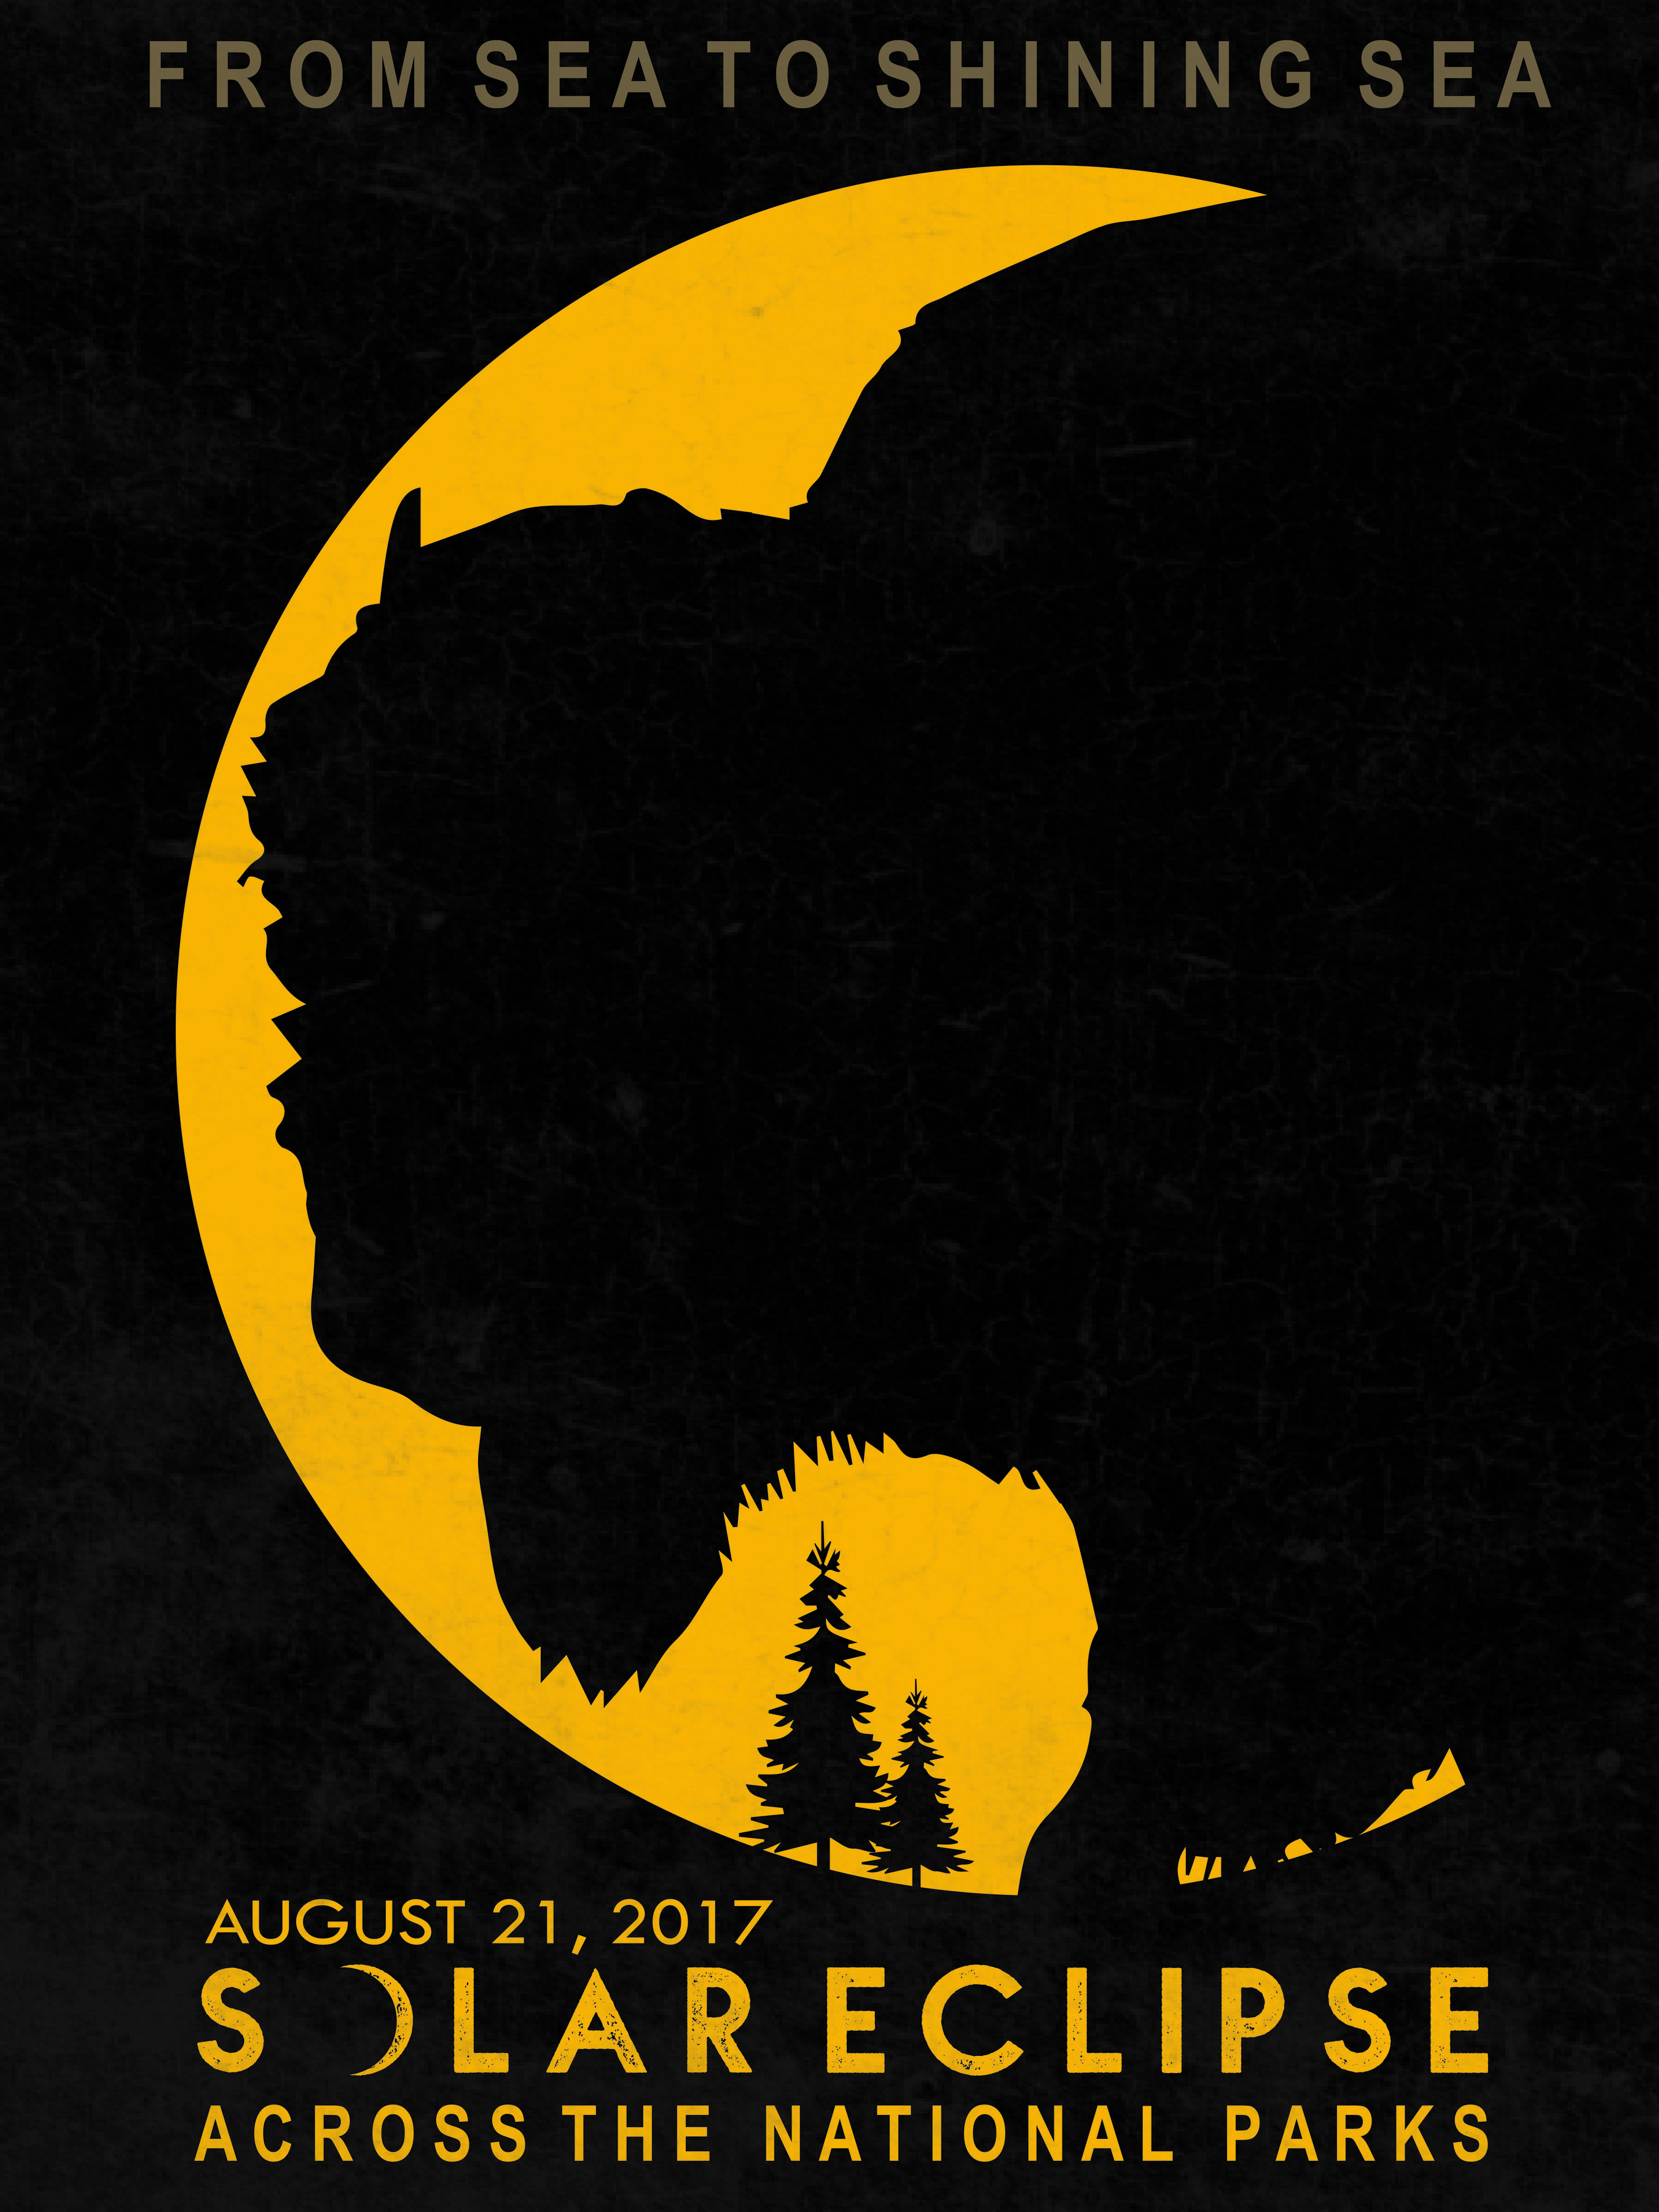 Dark grey graphic that shows an orange sun obscured by the silhouette of a bison's head and trees. Capitalized text at the top of the graphic reads, "From sea to shining sea." Capitalized text at the bottom of the graphic reads, "Solar eclipse across the national parks." Smaller capitalized text above this reads, "August 21, 2017."